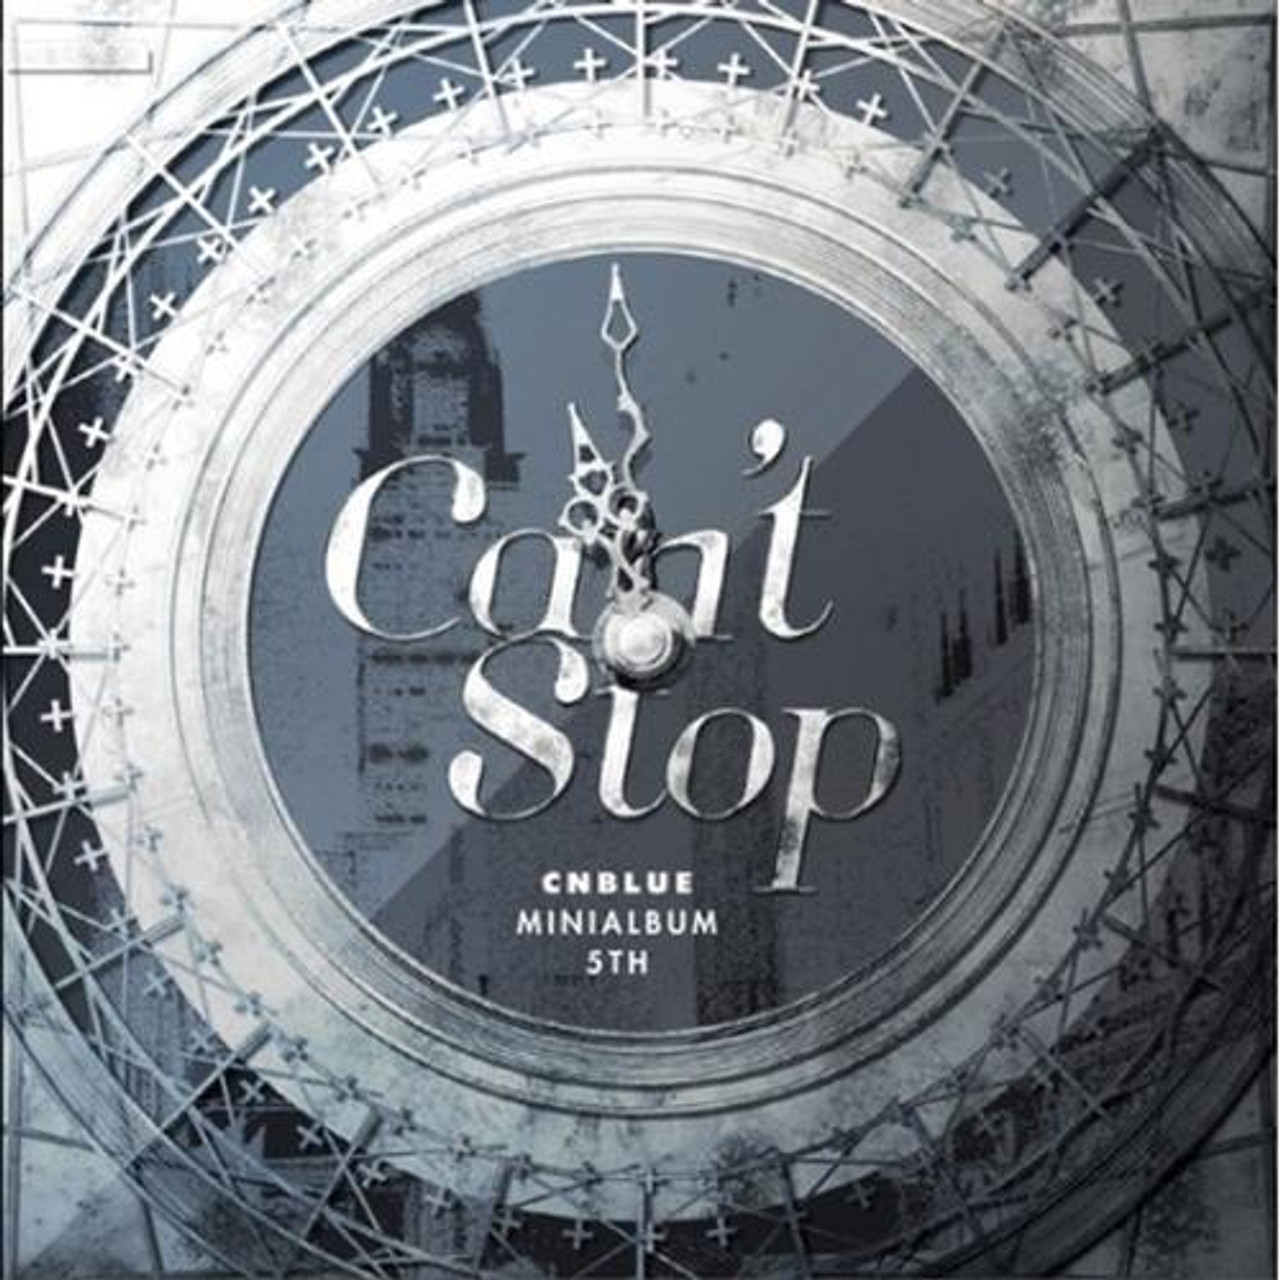 CNBlue/CANT STOP5th mini